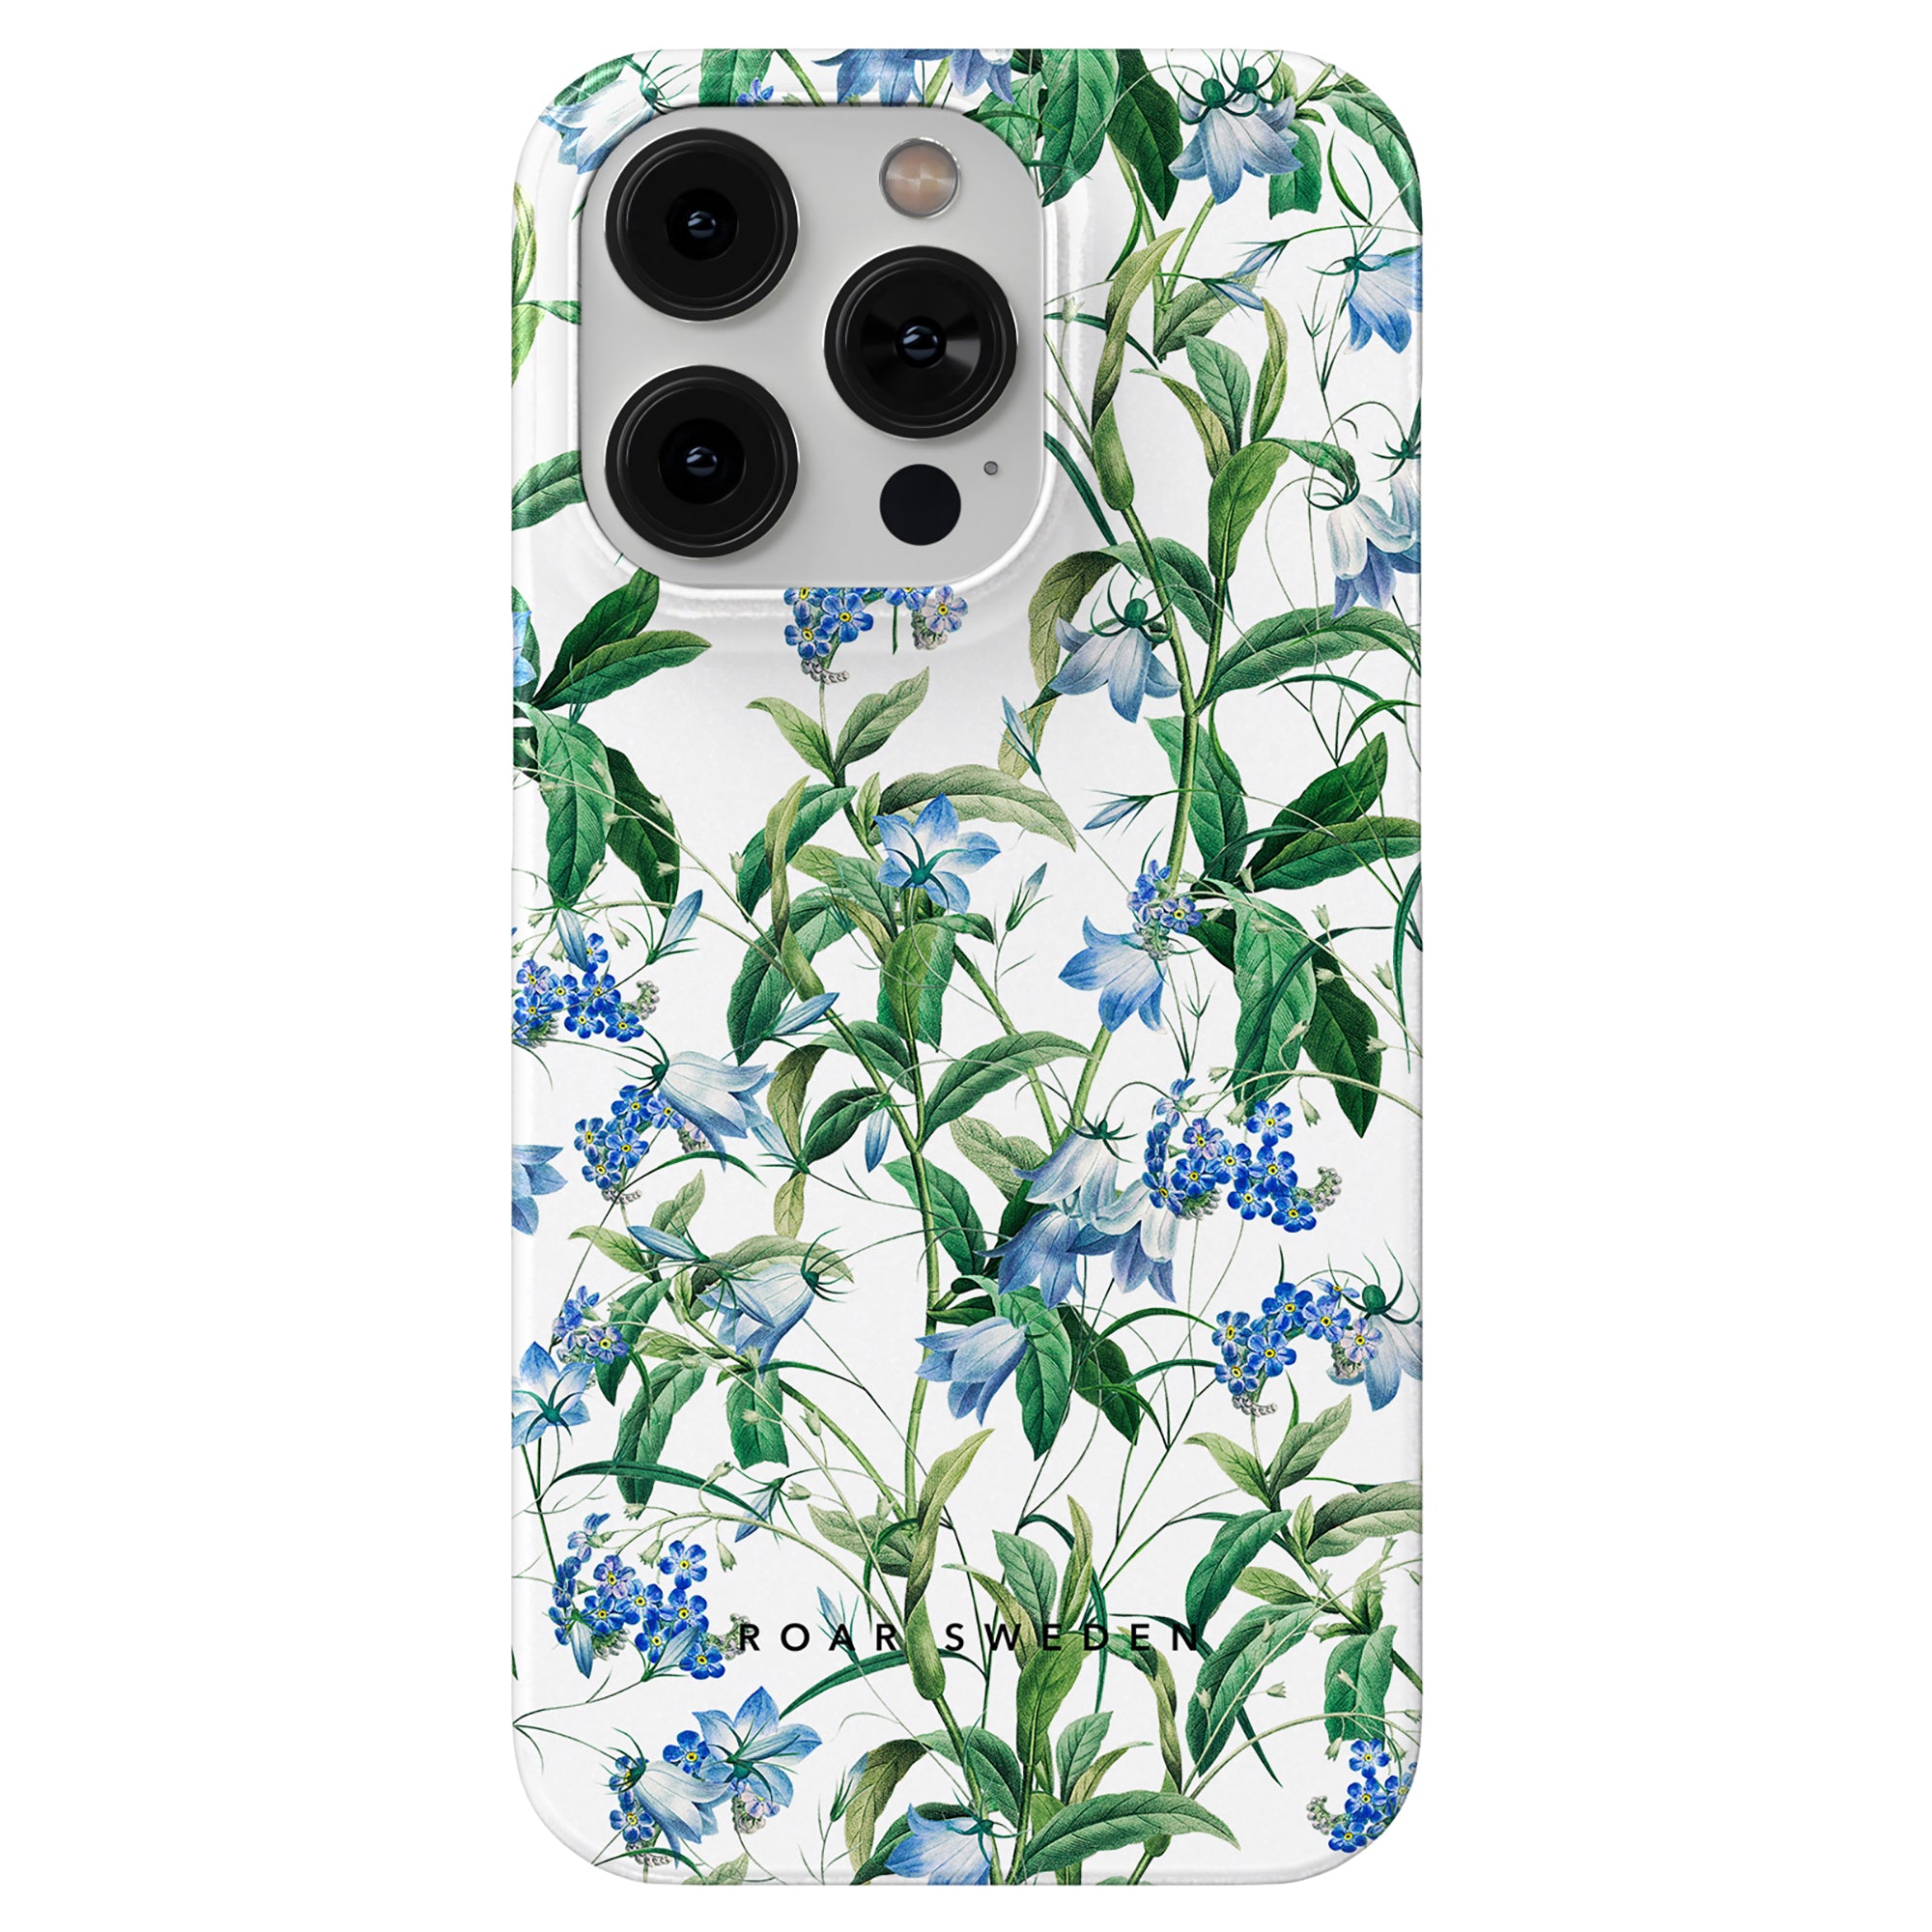 White smartphone case with a Blue Bells - Slim case design, inspired by natural motifs.